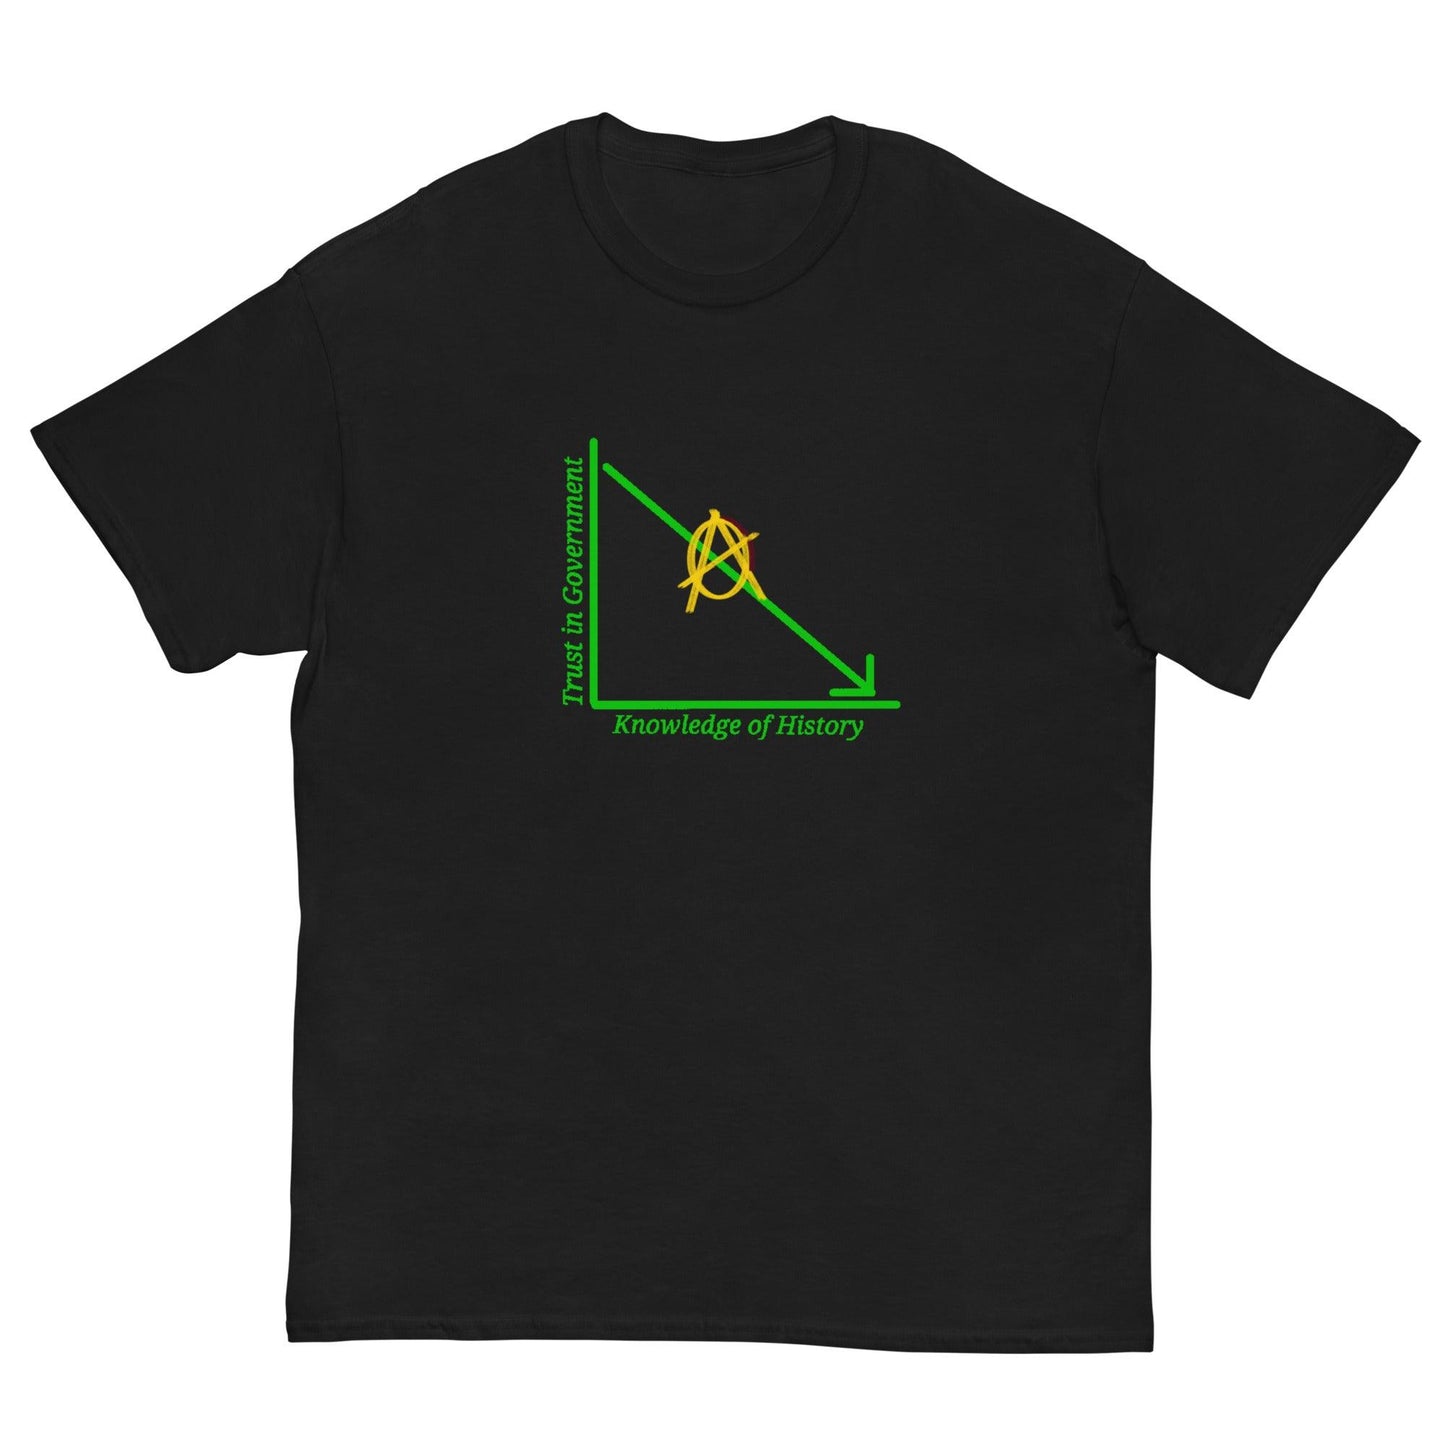 Anarchy "Trust in Government" Green Classic tee - AnarchyWear